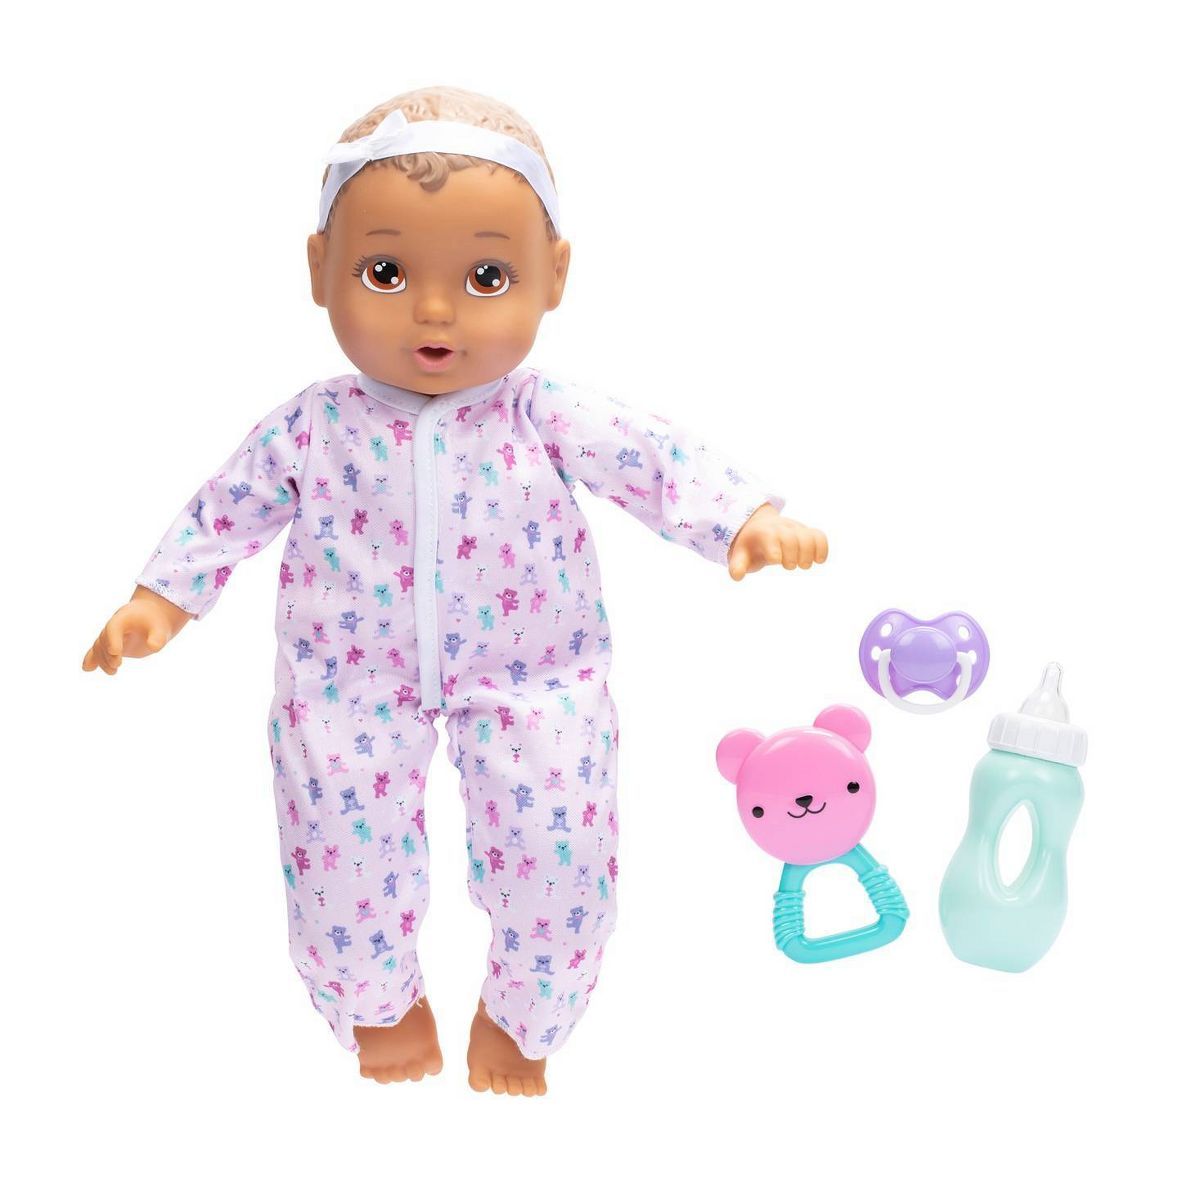 Perfectly Cute Cuddle and Care Baby Doll - Brown Eyes | Target